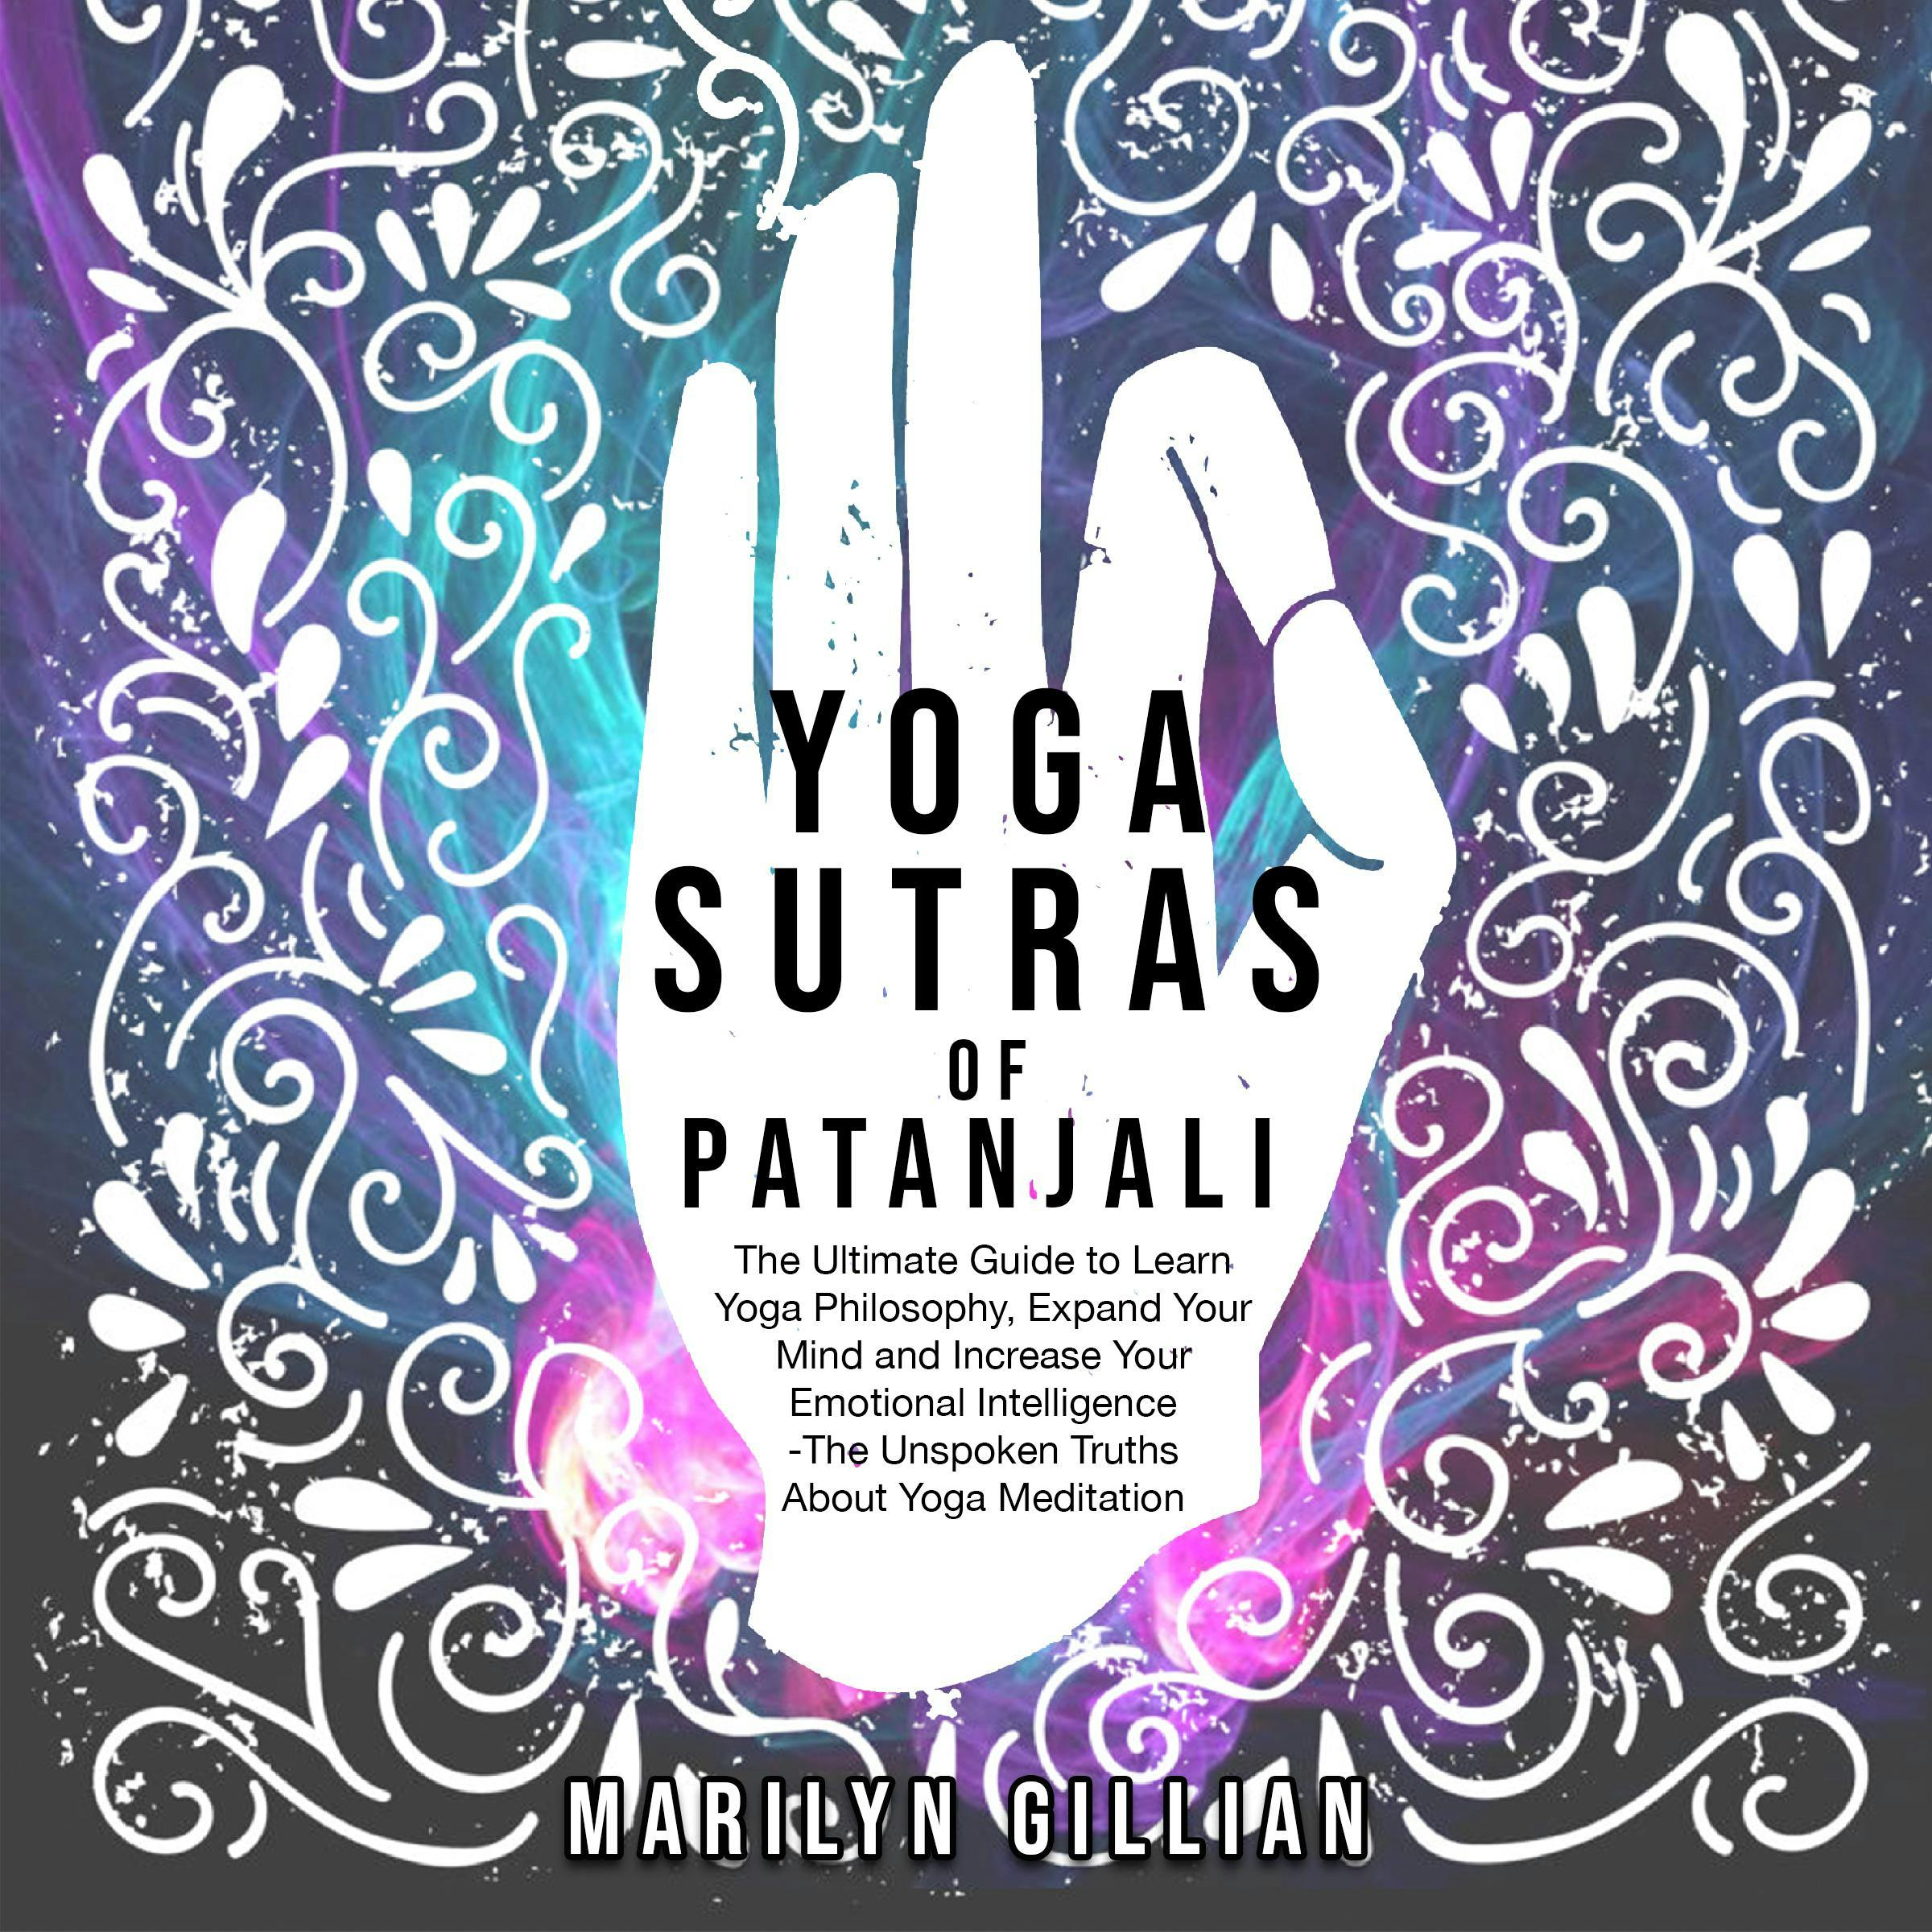 Yoga Sutras of Patanjali: The Ultimate Guide to Learn Yoga Philosophy, Expand Your Mind and Increase Your Emotional Intelligence - The Unspoken Truths About Yoga Meditation - Marilyn Gillian